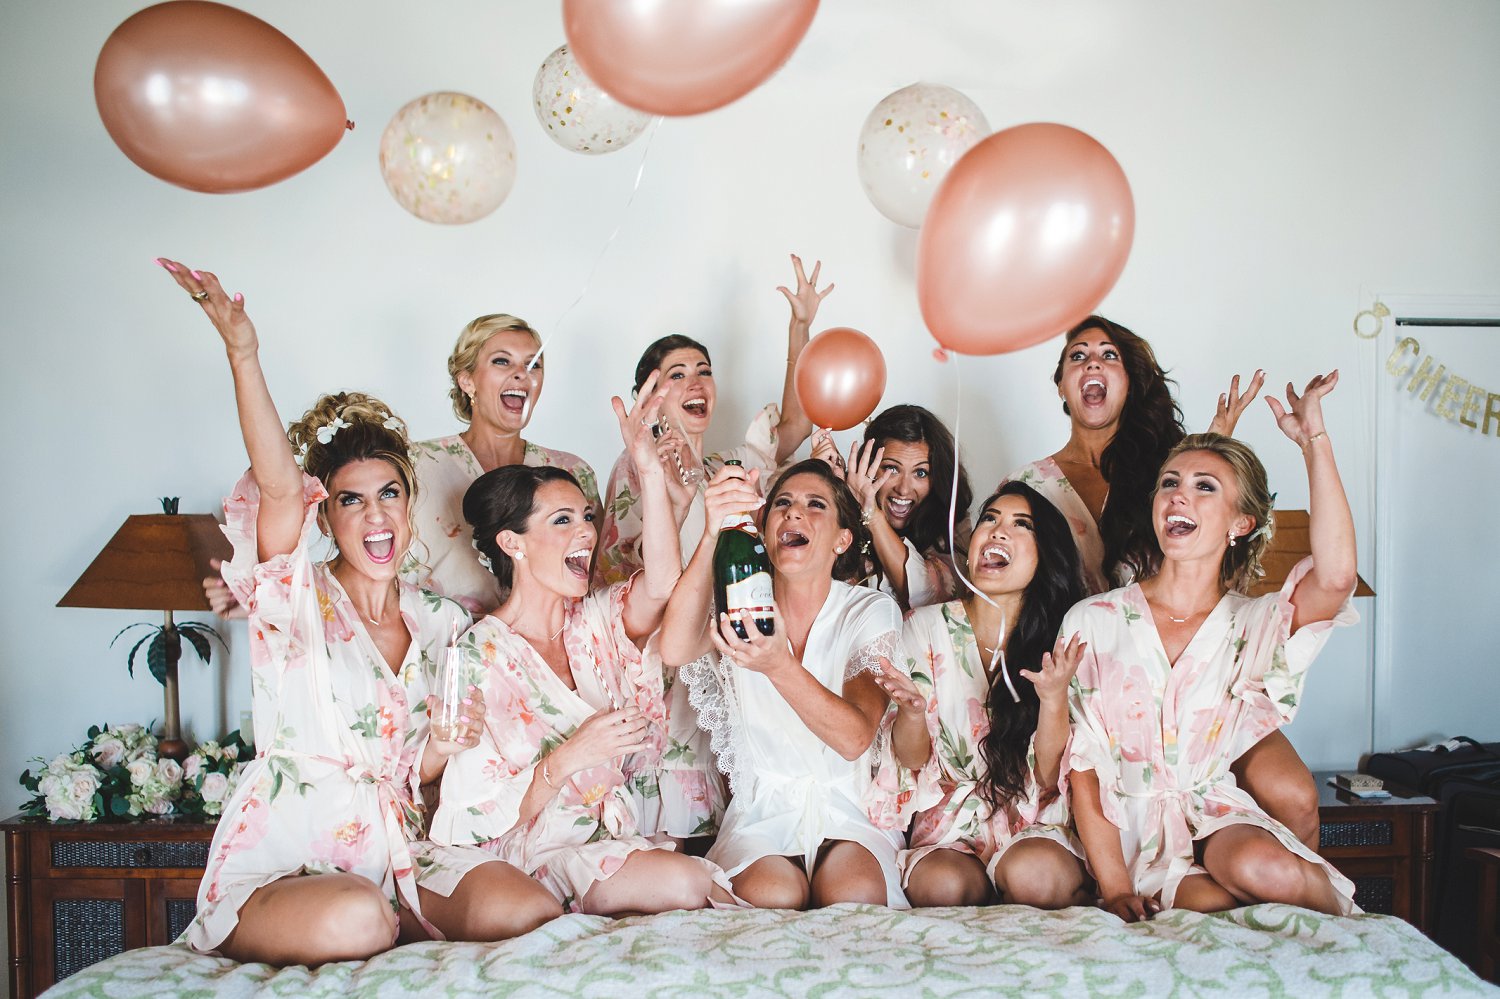 Must have bride and bridesmaids getting ready photo with champagne, balloons and matching robes.